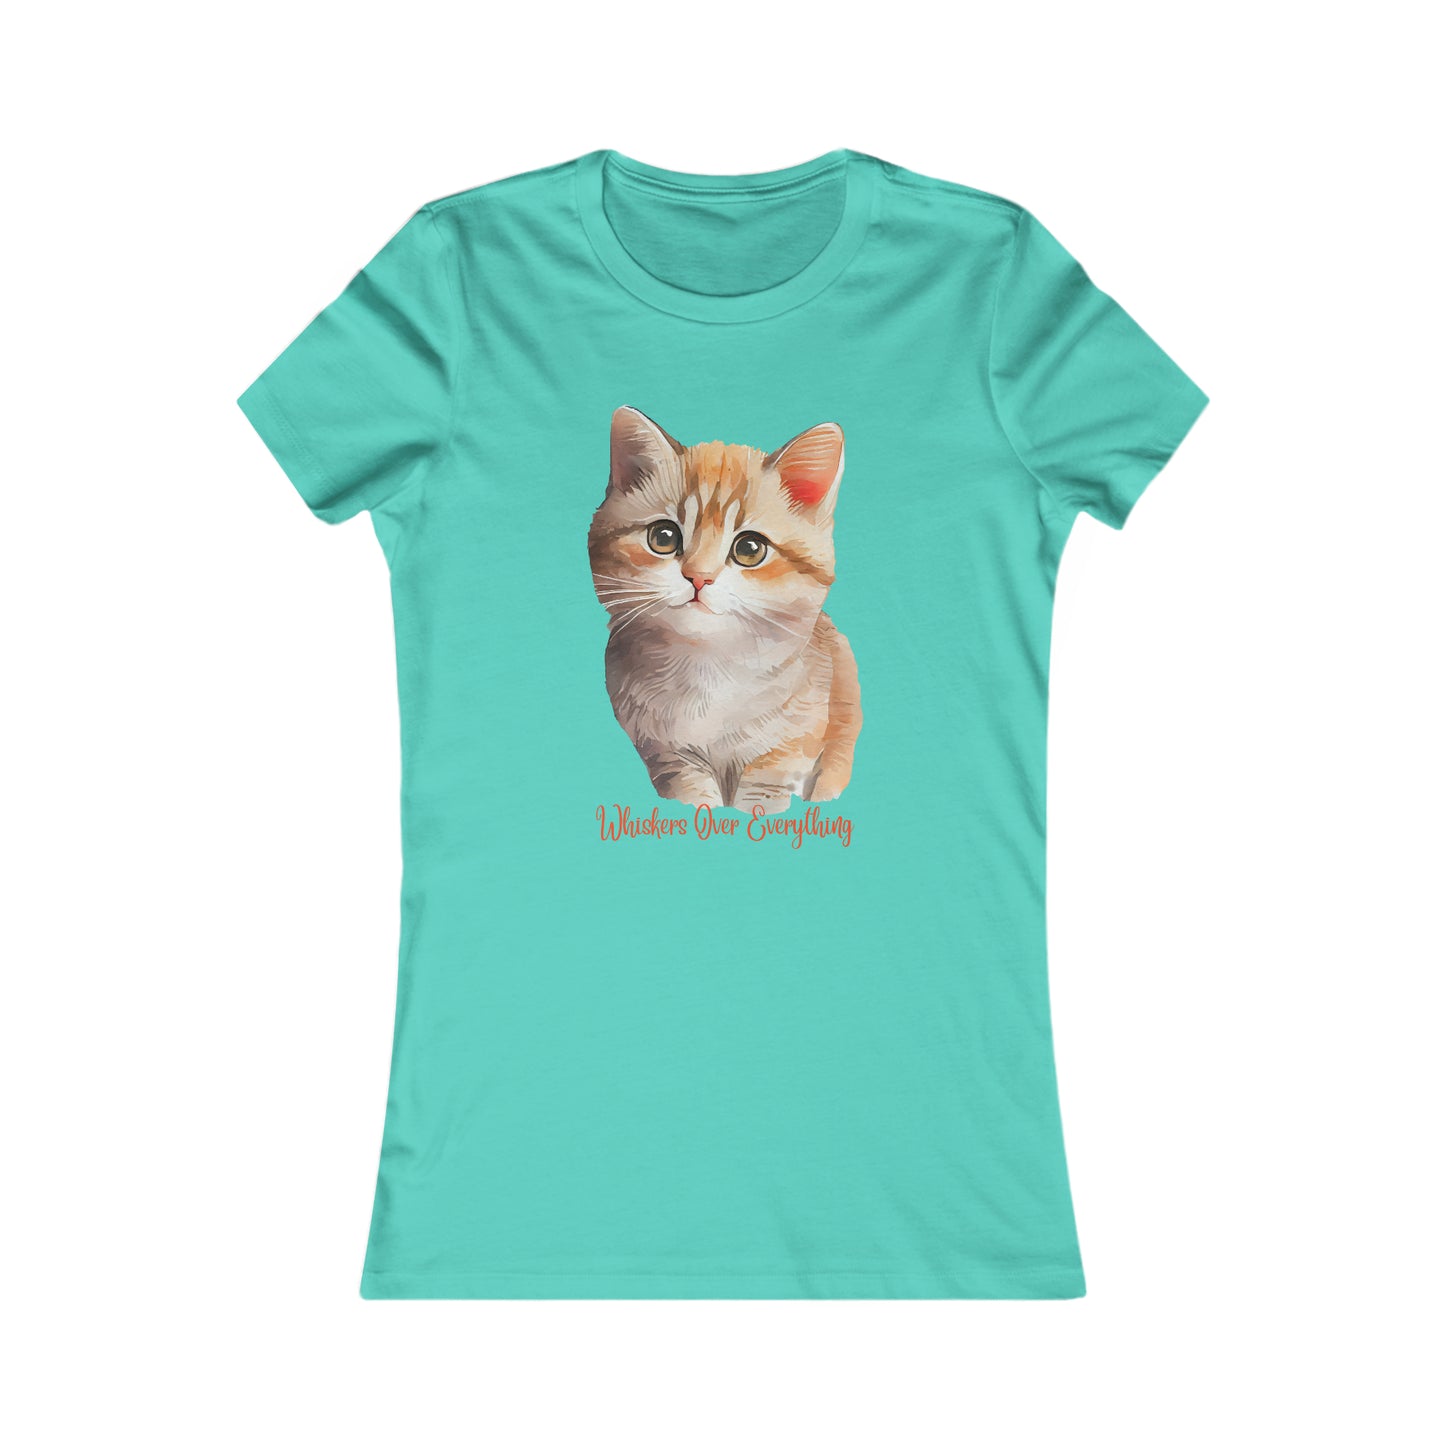 For that cat lover “Whiskers over everything” on this Women's Favorite Tee in several colors for you to choose from. Slim fit so please check the size table.